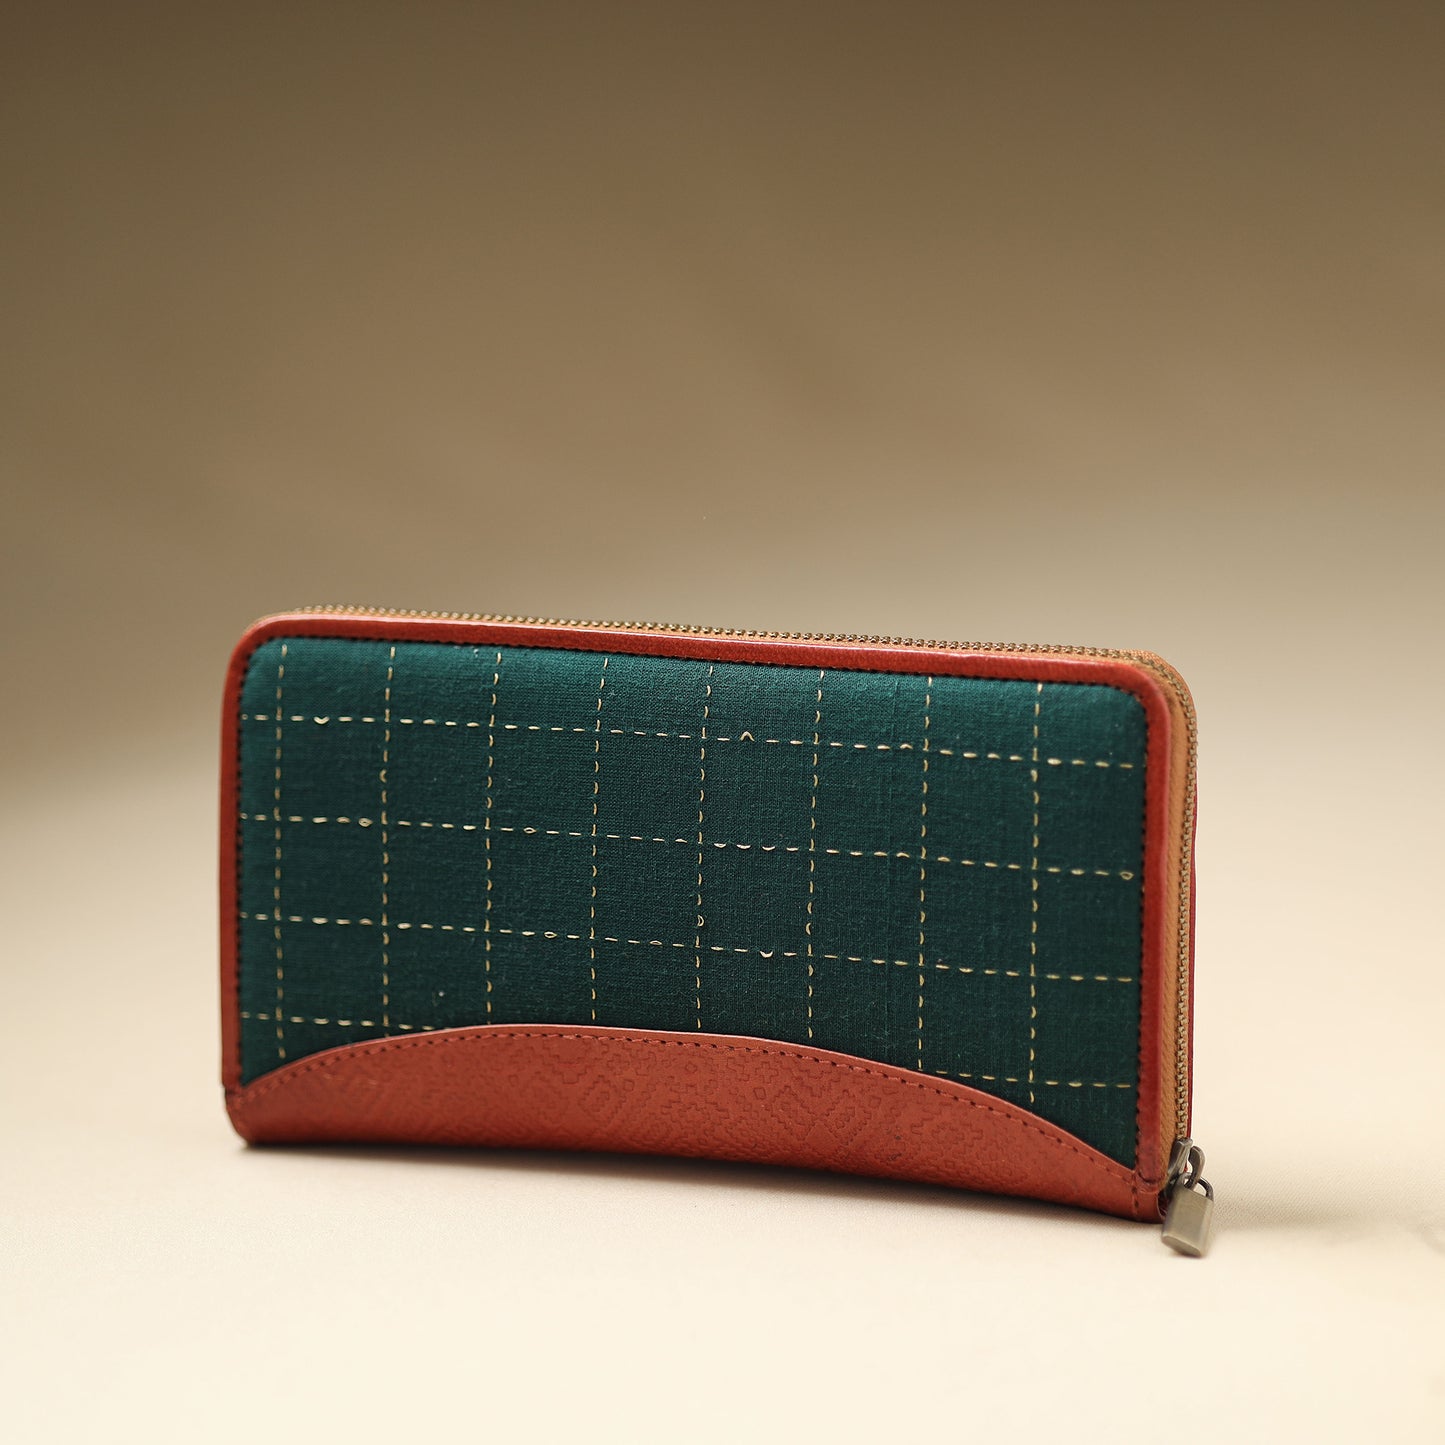 Handcrafted Jacquard Weave Leather Wallet